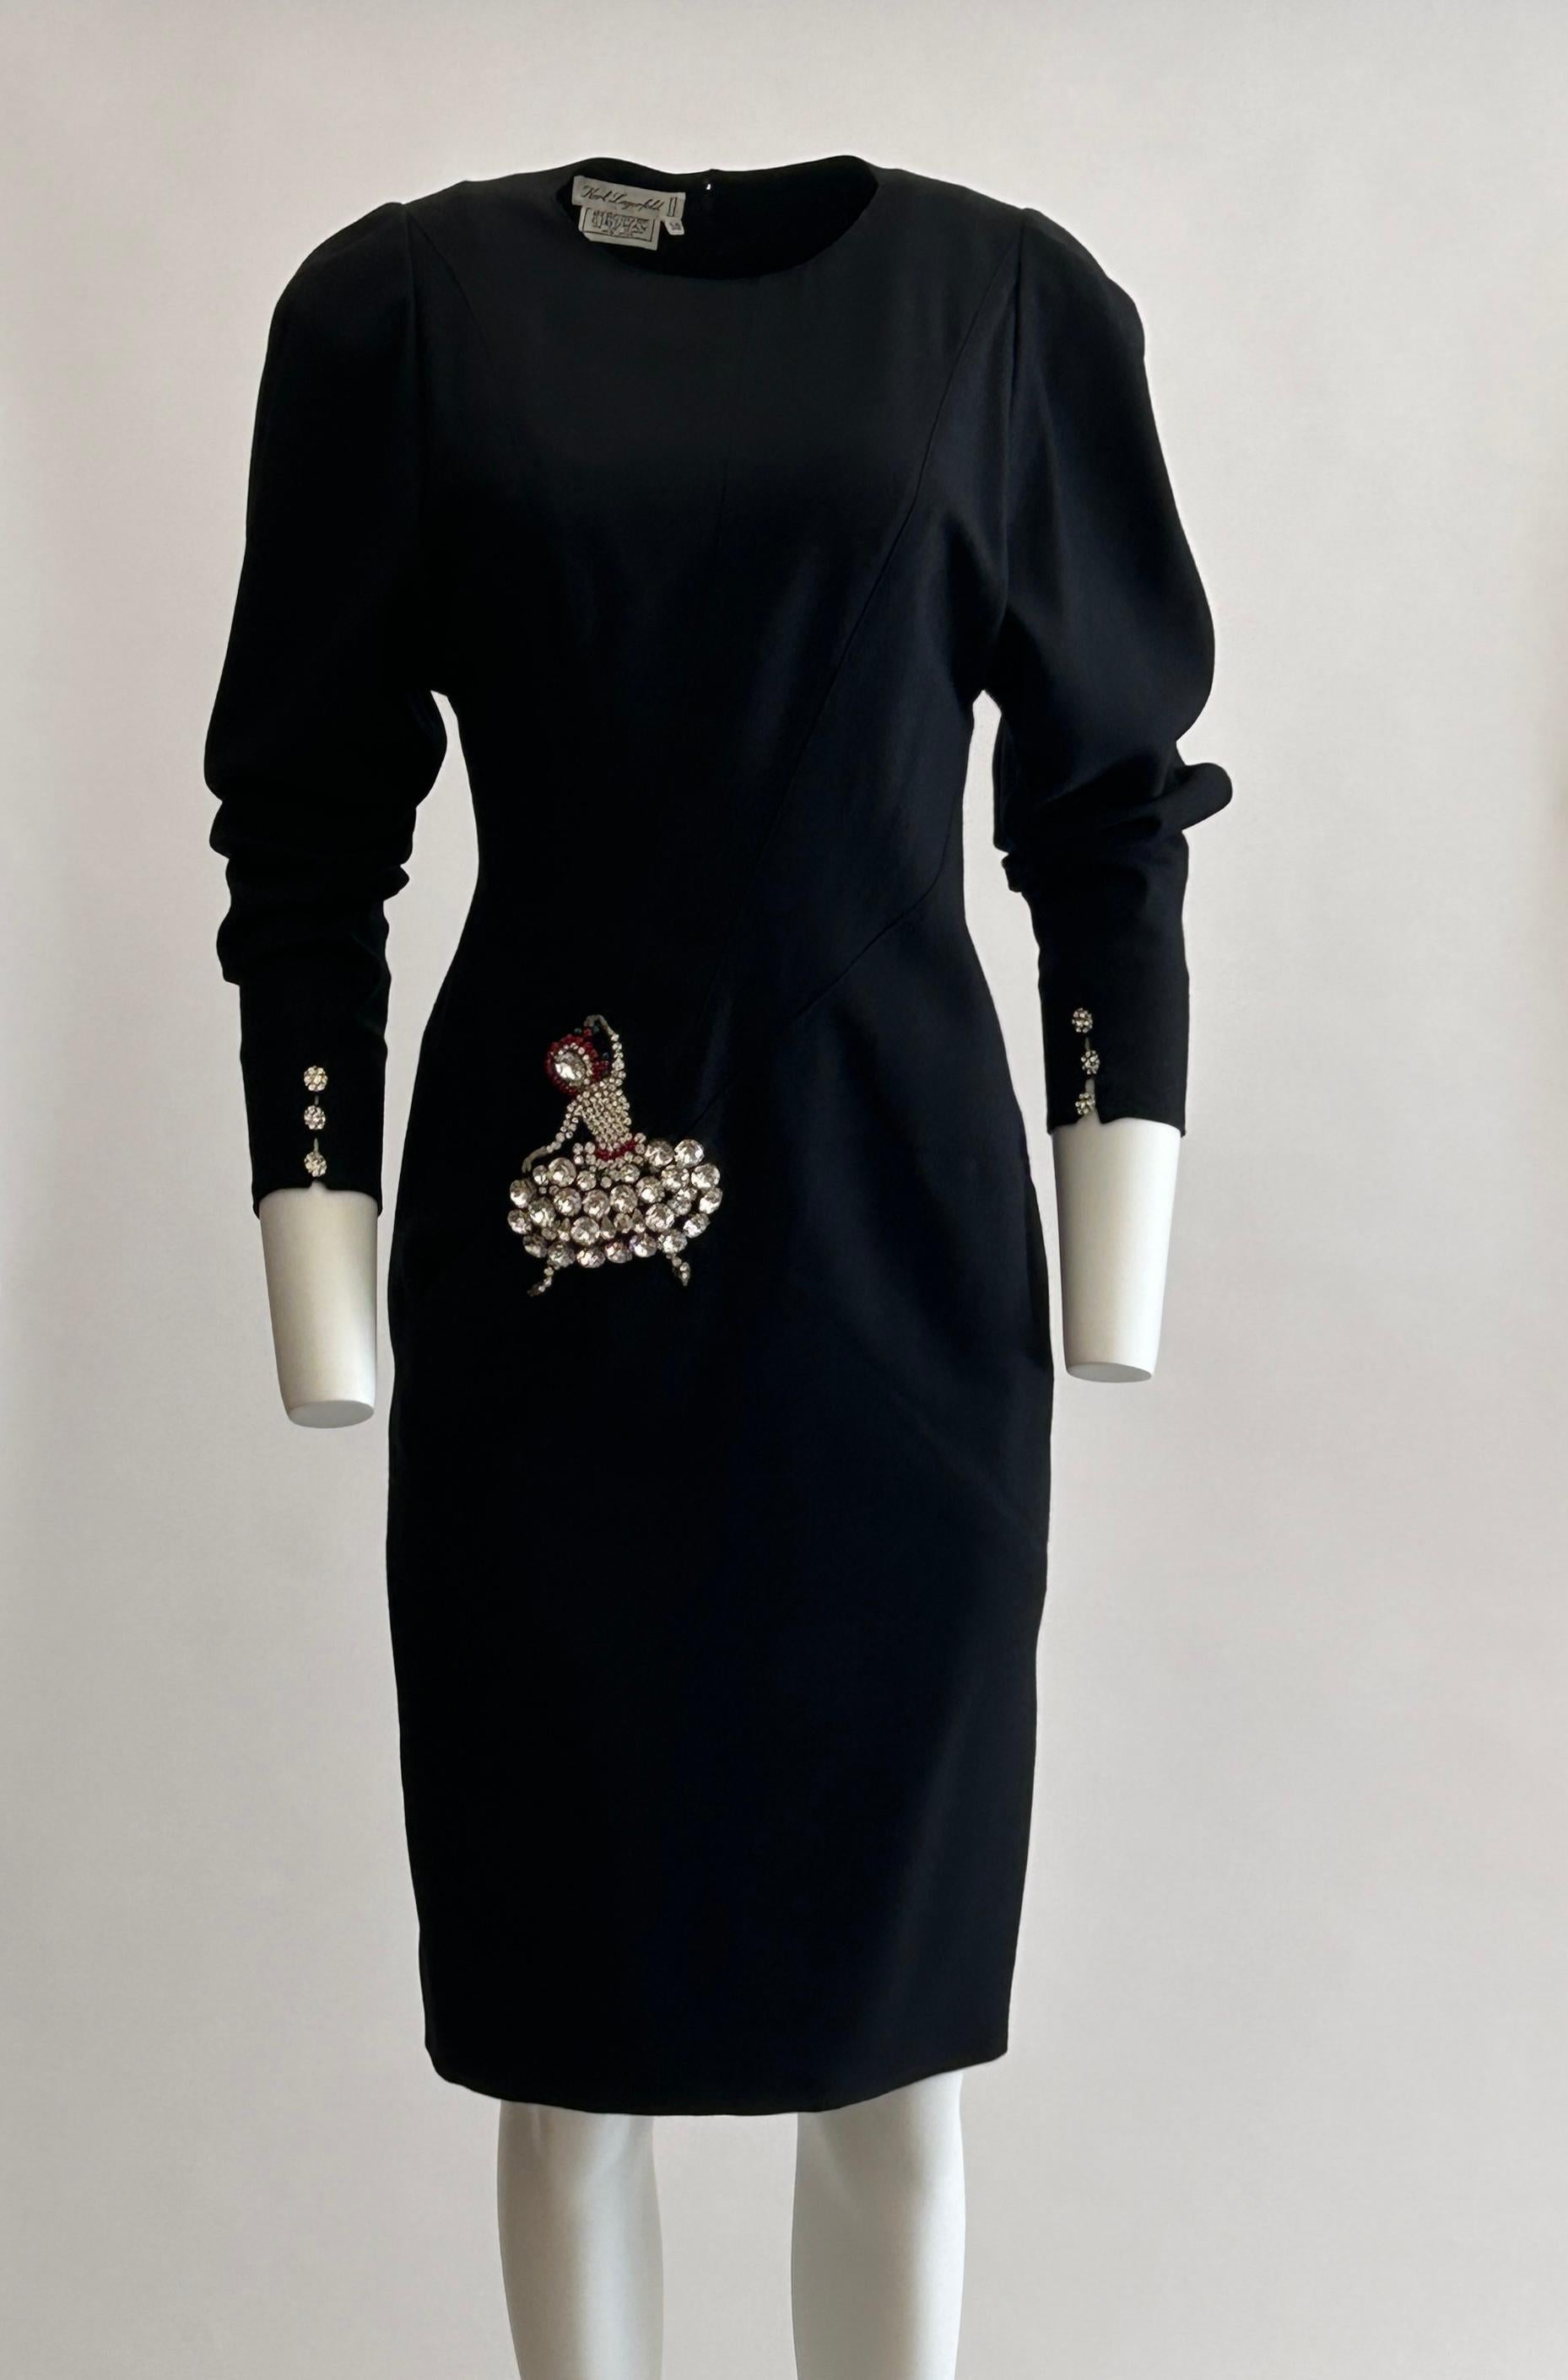 Karl Lagerfeld vintage 1980s black wool long sleeve dress with embellished rhinestone/crystal ballerina at front and great seam detailing at bodice. Leg of mutton sleeves with rhinestone embellished buttons at cuffs. Small pocket at one side of